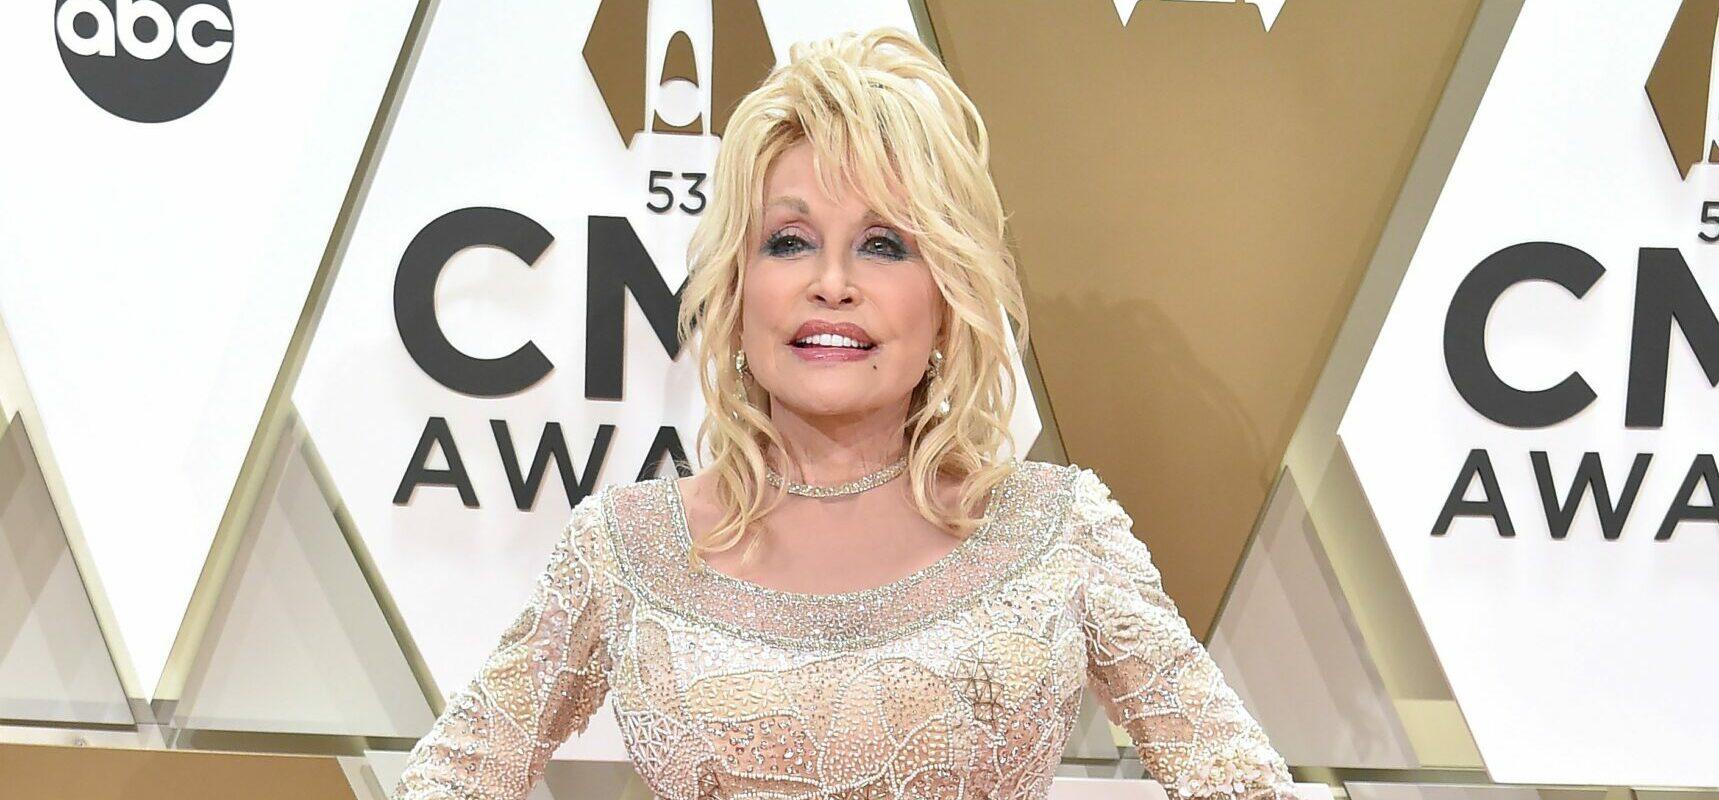 Dolly Parton Once Pranked Her Husband By Arresting Him While On Stage